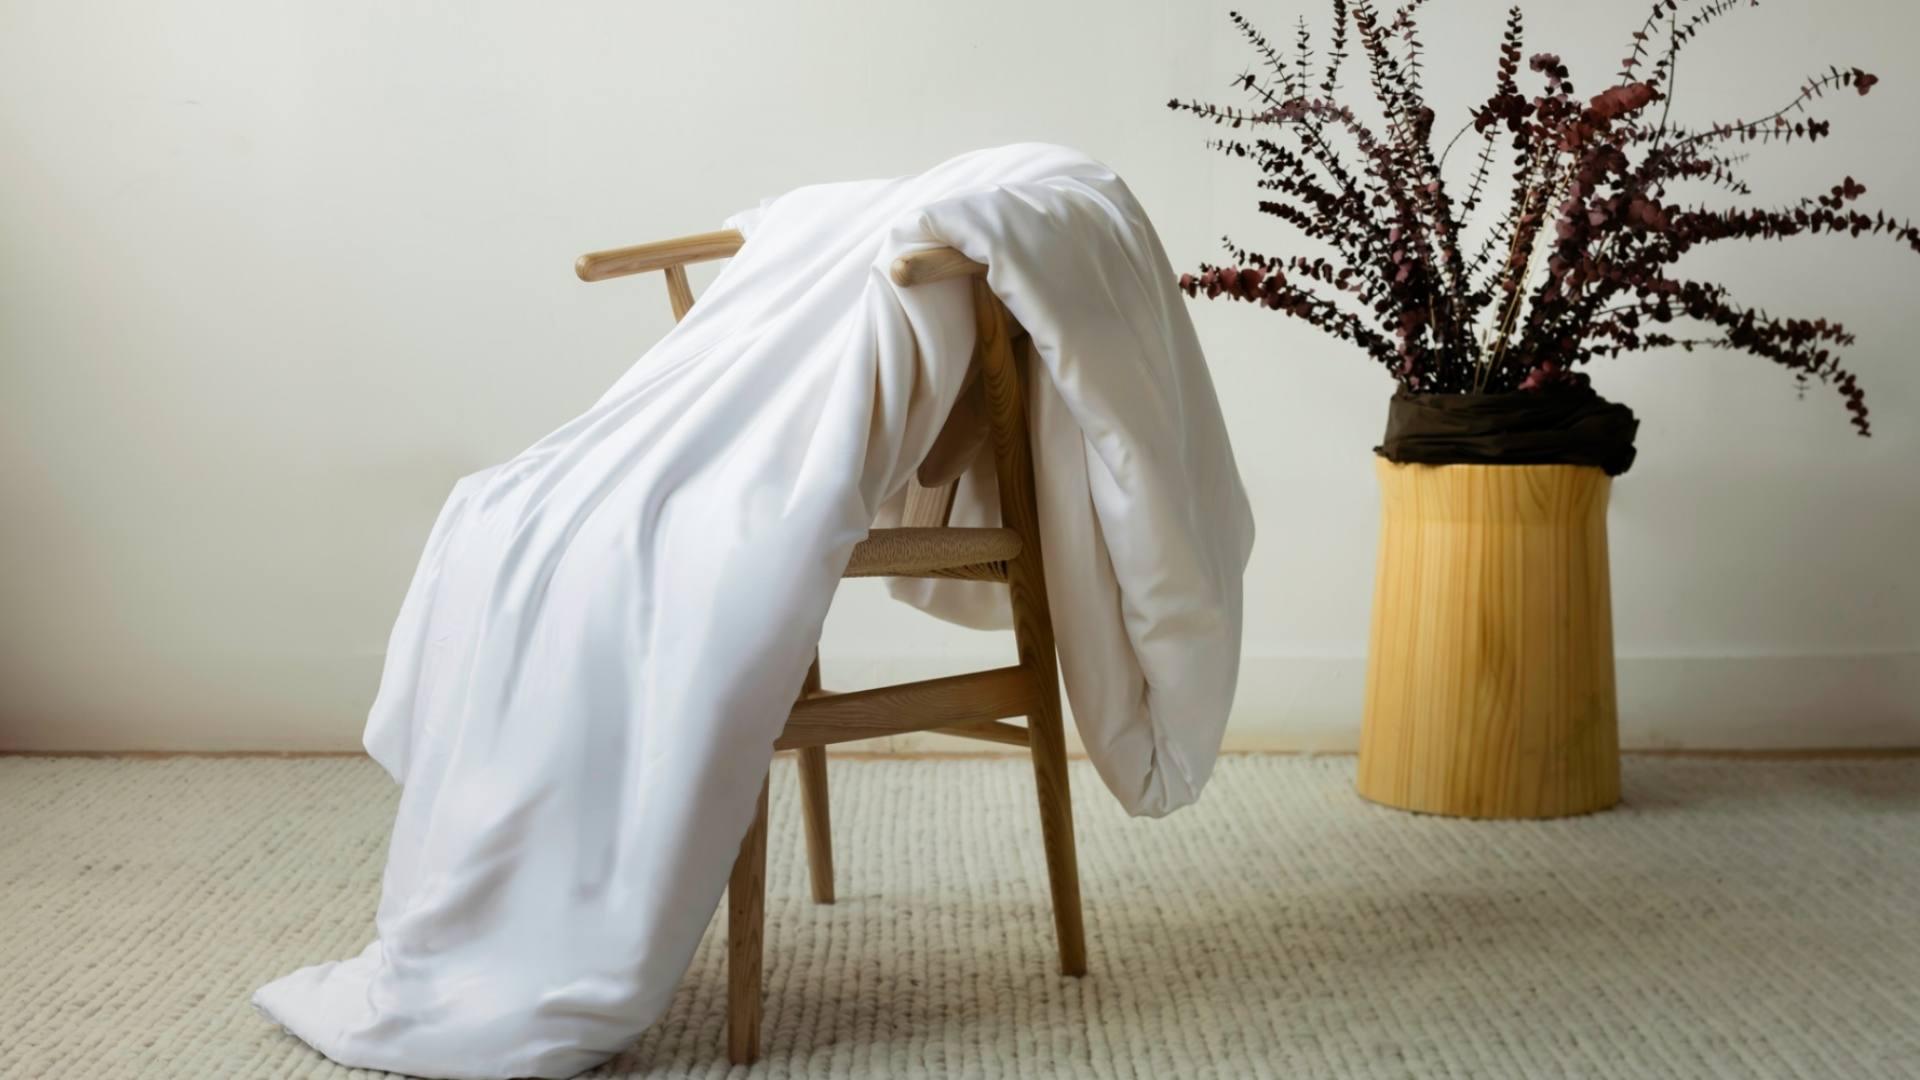 A soft, cozy white comforter is draped over a wooden chair. There is a big plant behind it.